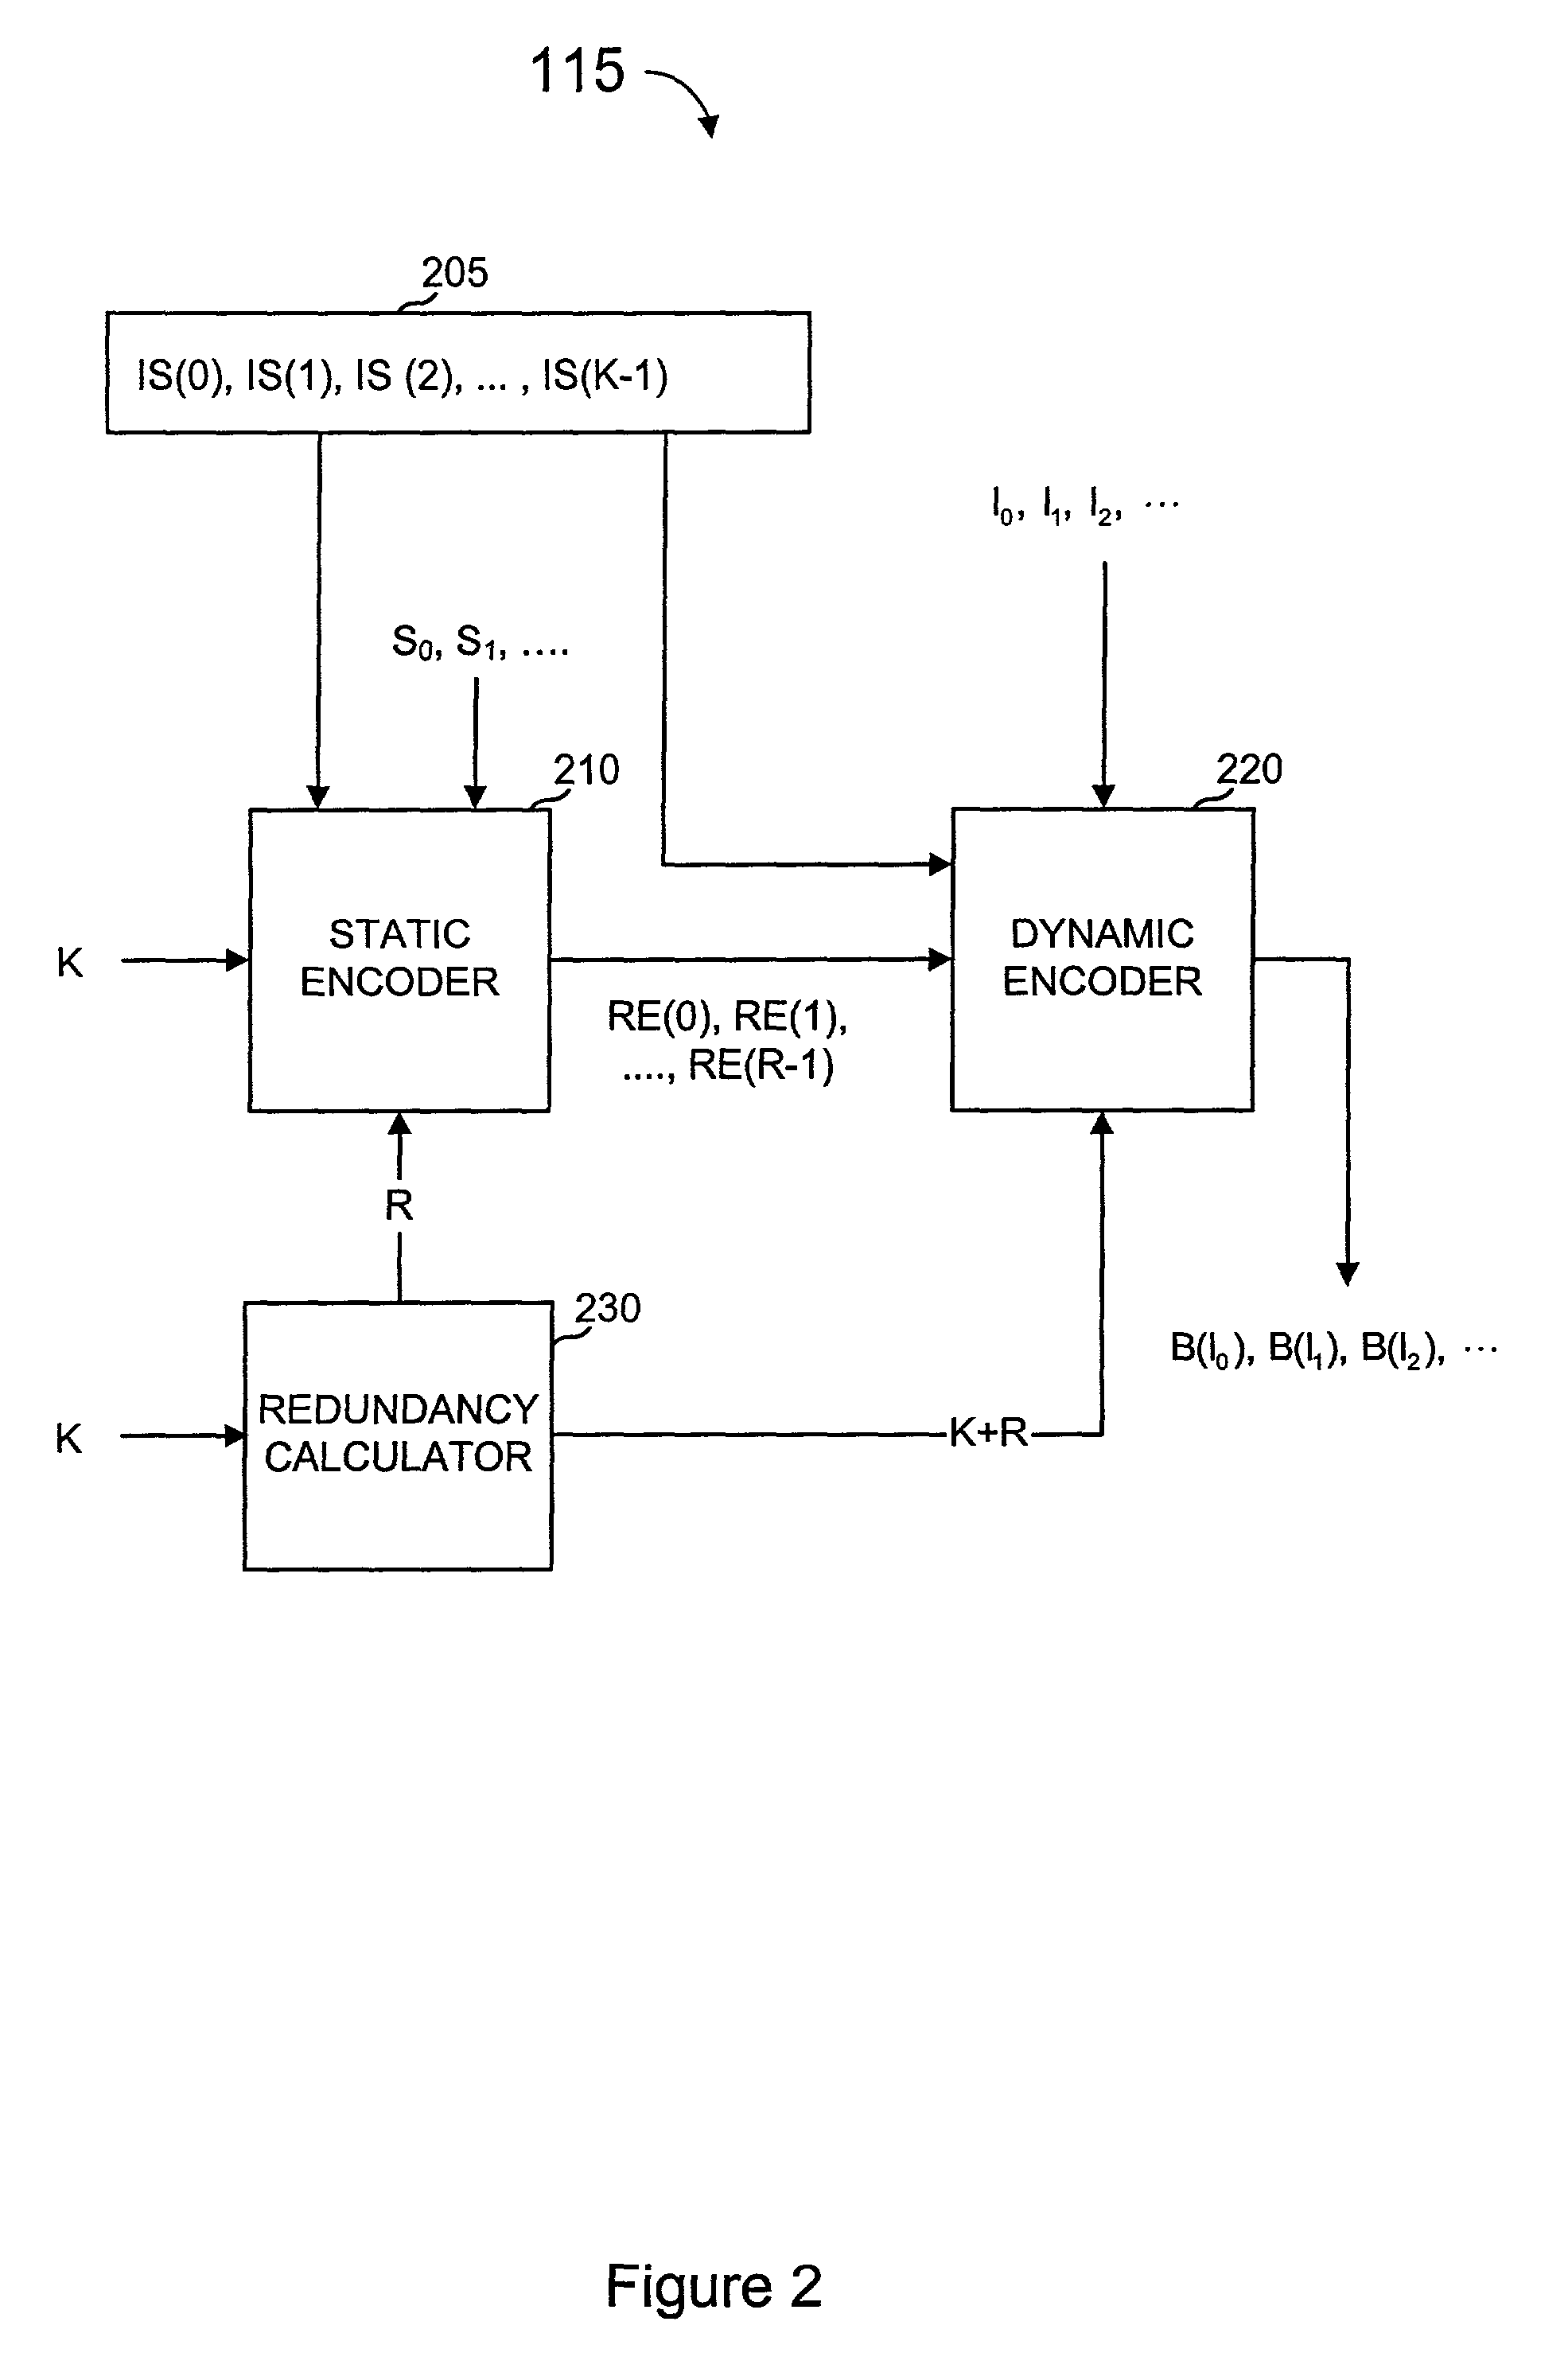 Multi-stage code generator and decoder for communication systems